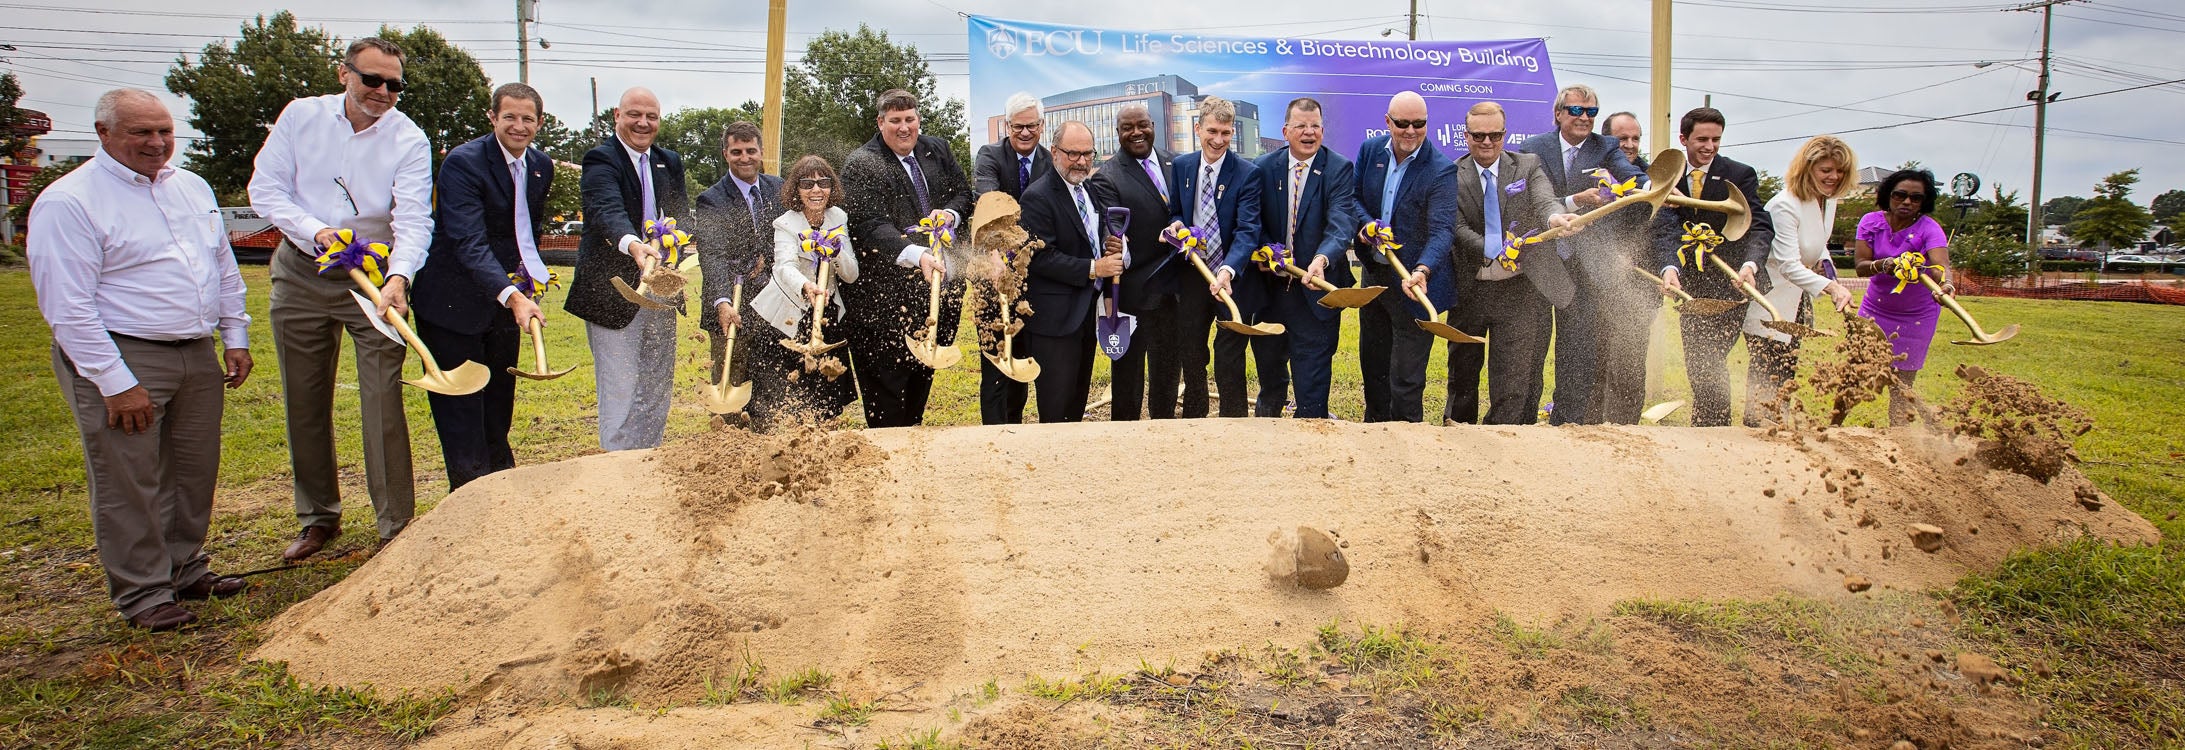 ECU officials and representatives from the design and construction firms responsible for the Life Sciences and Biotechnology Building break ground on the $90 million project. (Photos by Cliff Hollis)